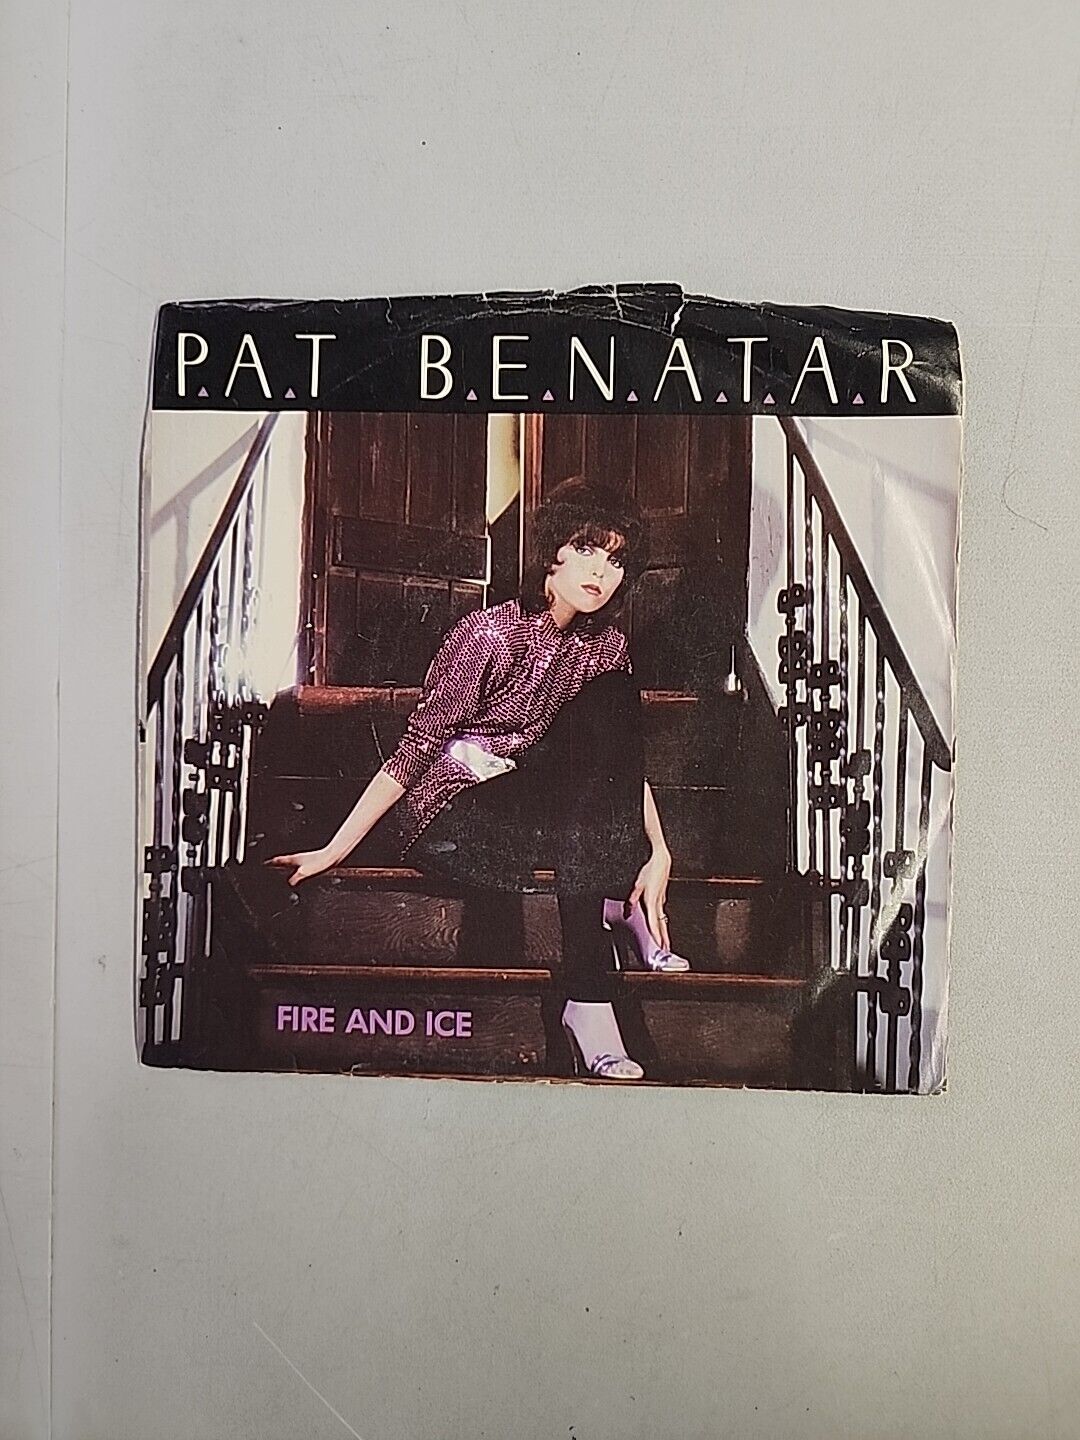 Pat Benatar - Fire And Ice- RECORD SLEEVE ONLY (45RPM 7”) (SLV176) 